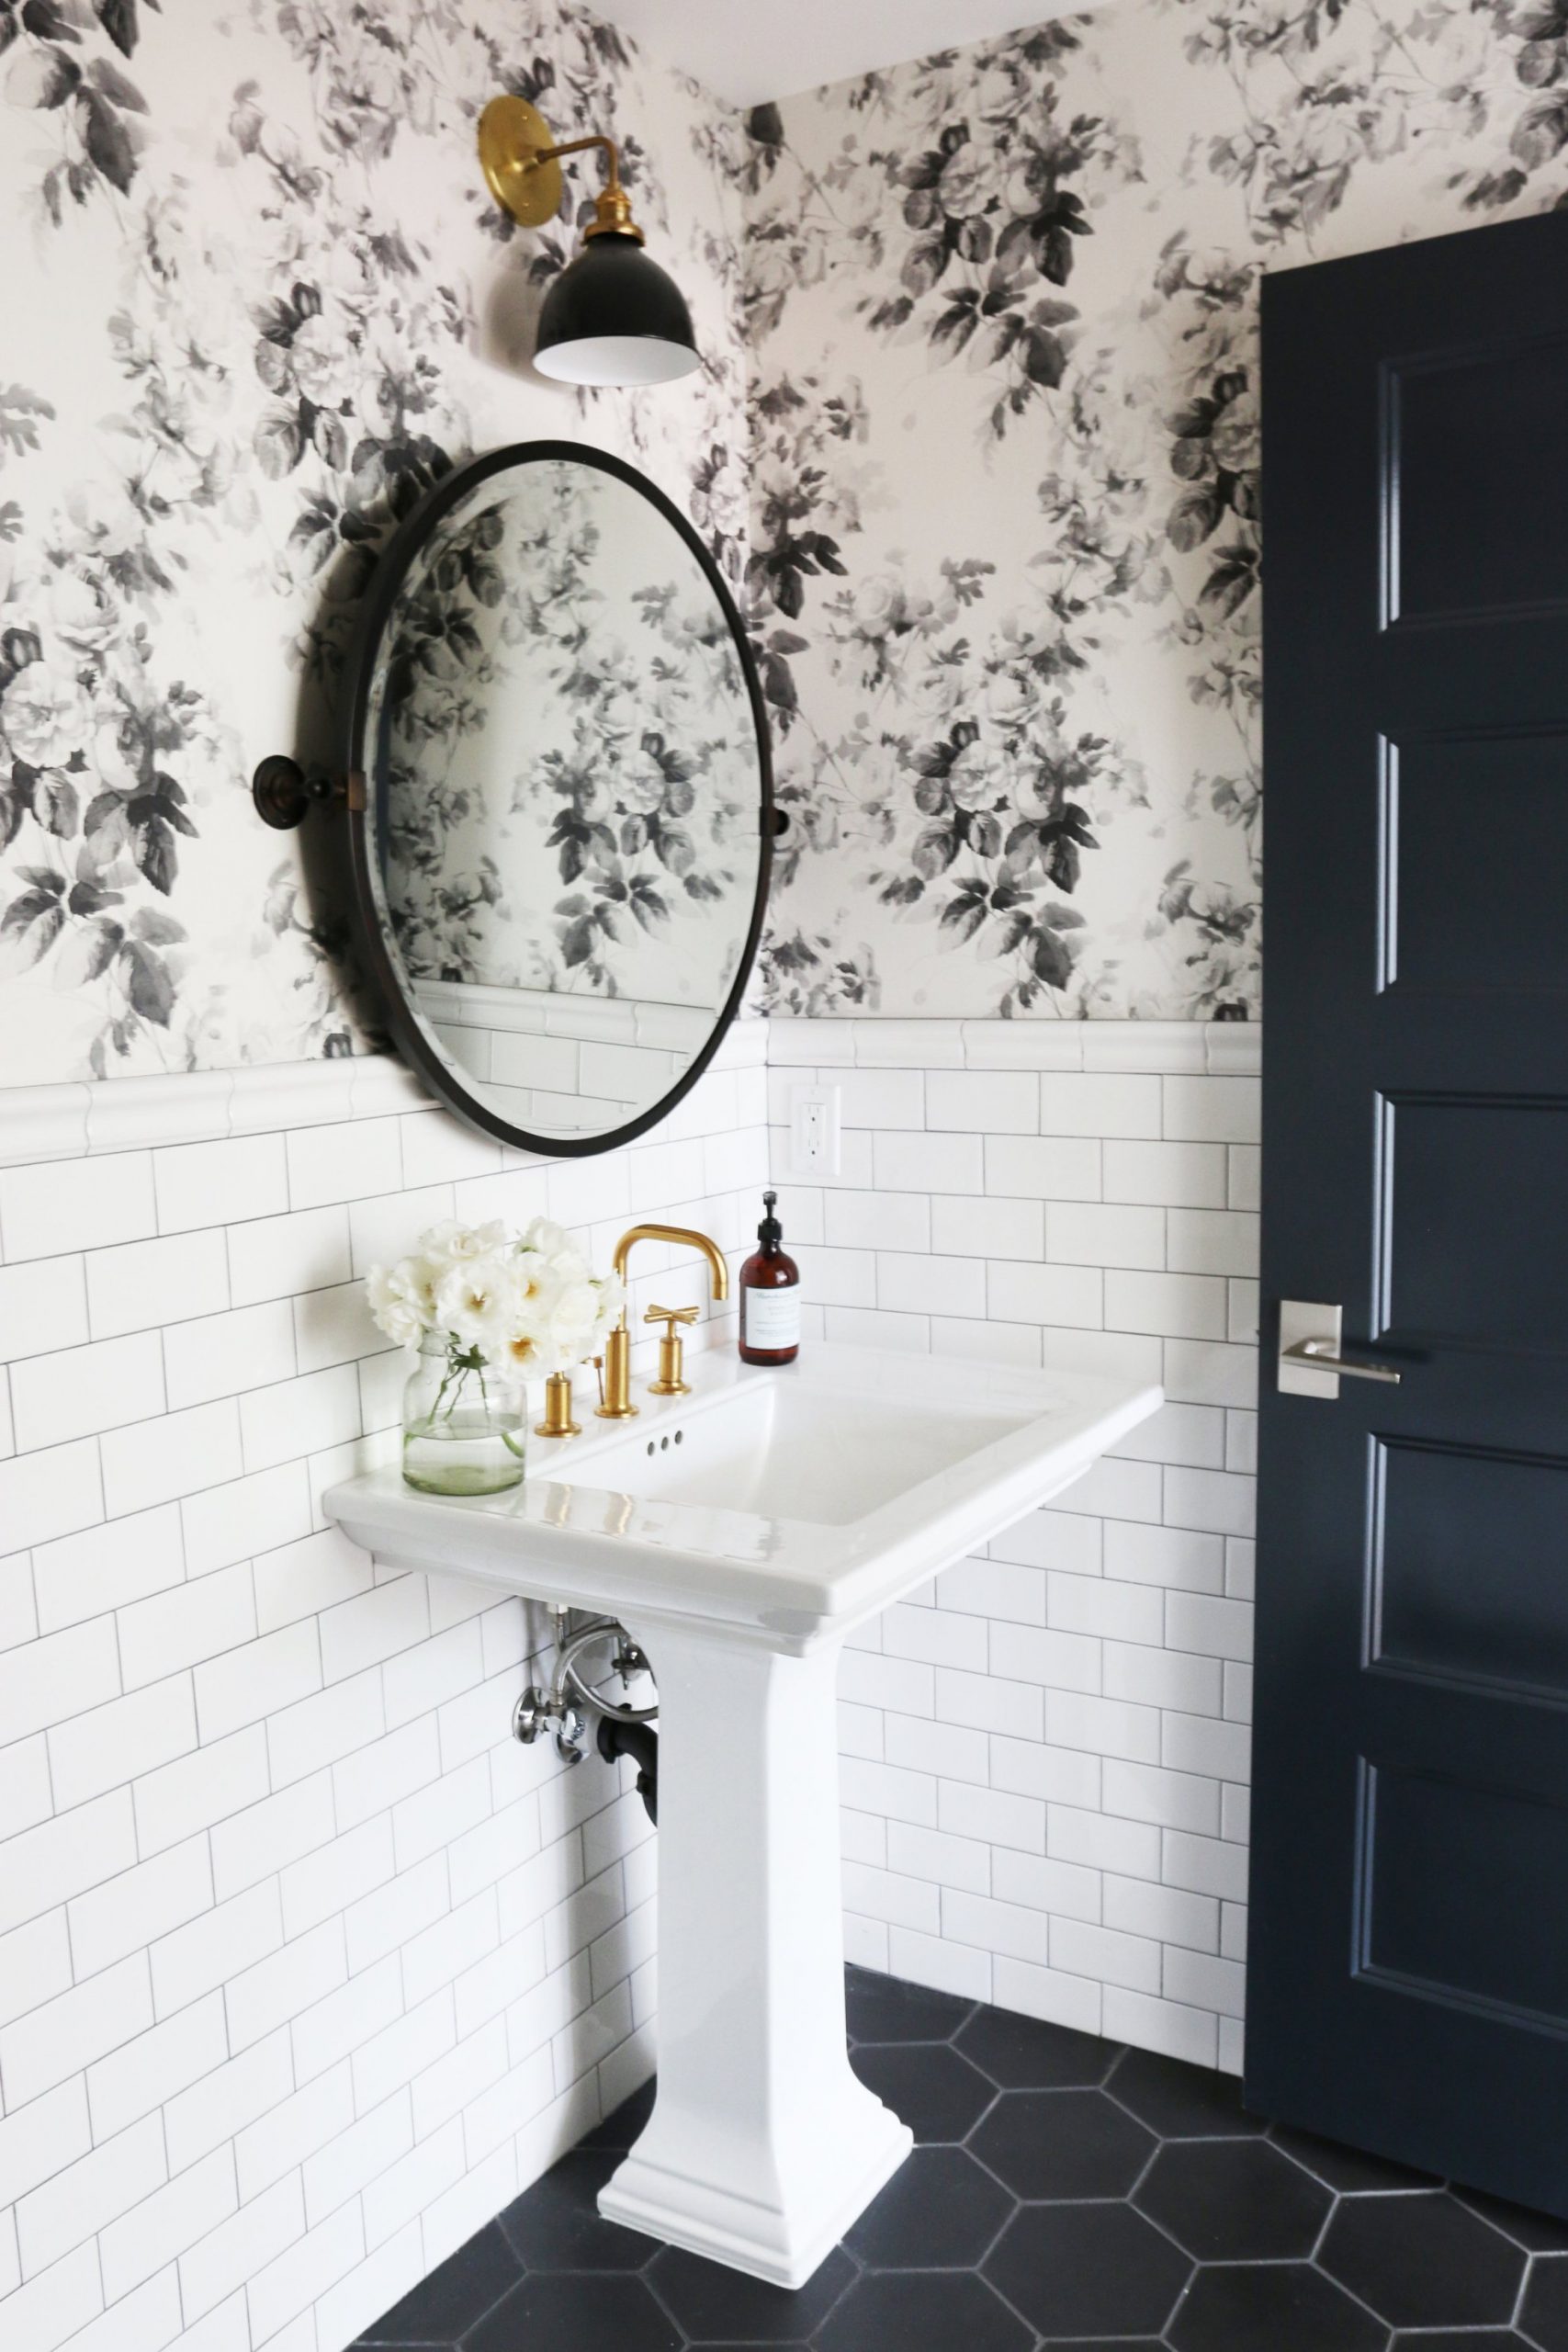 25 Wallpapered Bathrooms: B&W to Colorful, Subtle to Bold